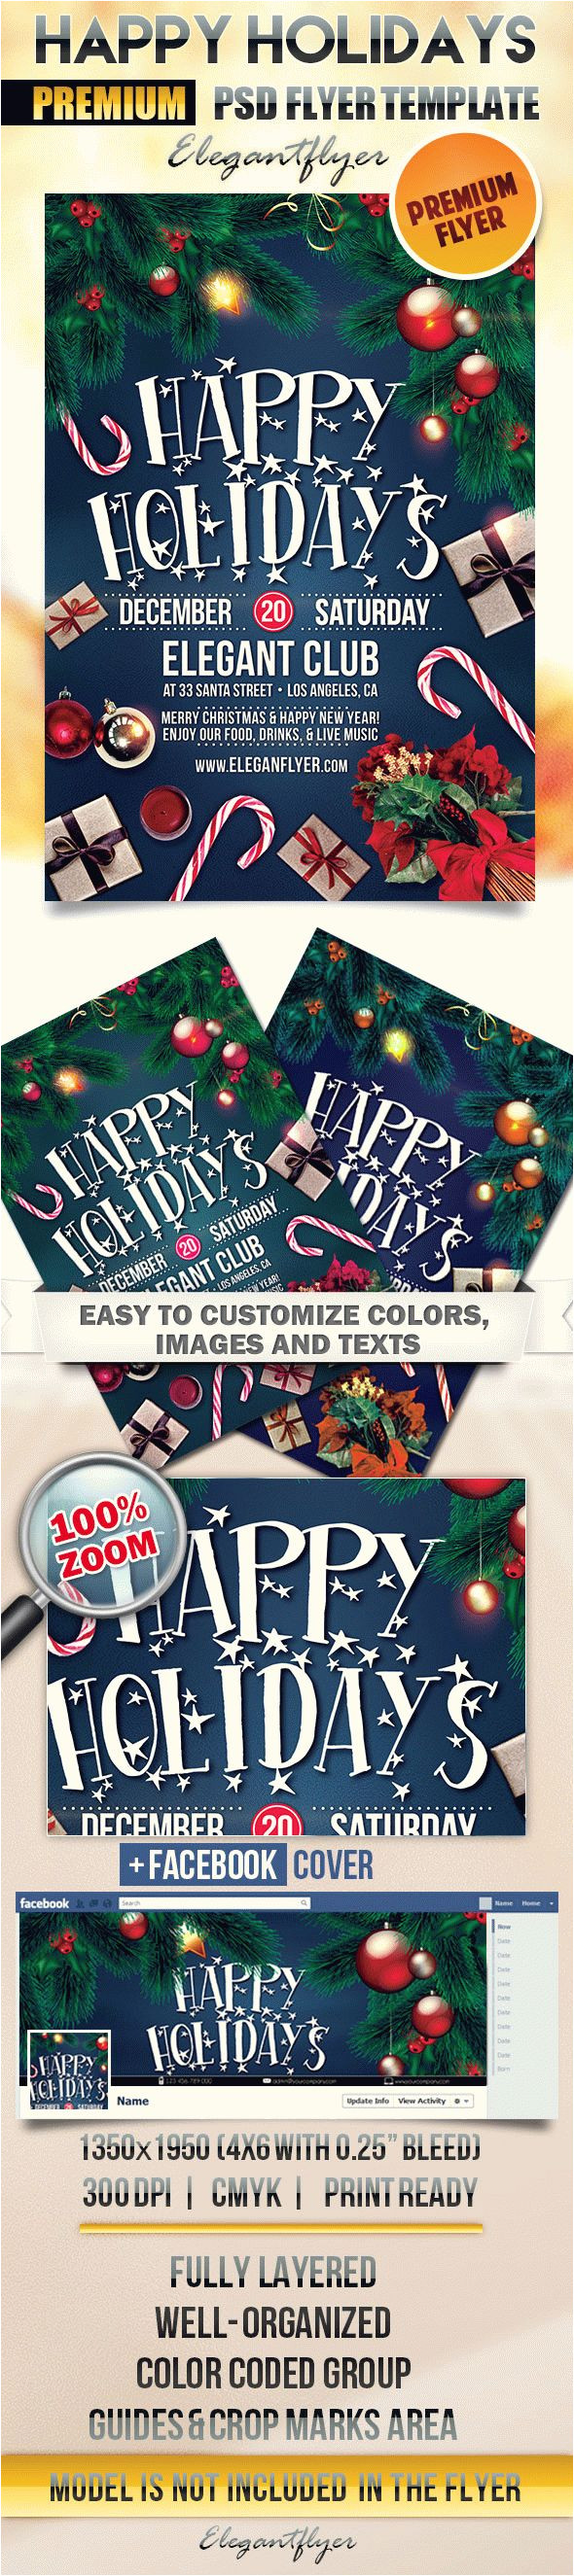 happy holidays flyer psd template facebook cover